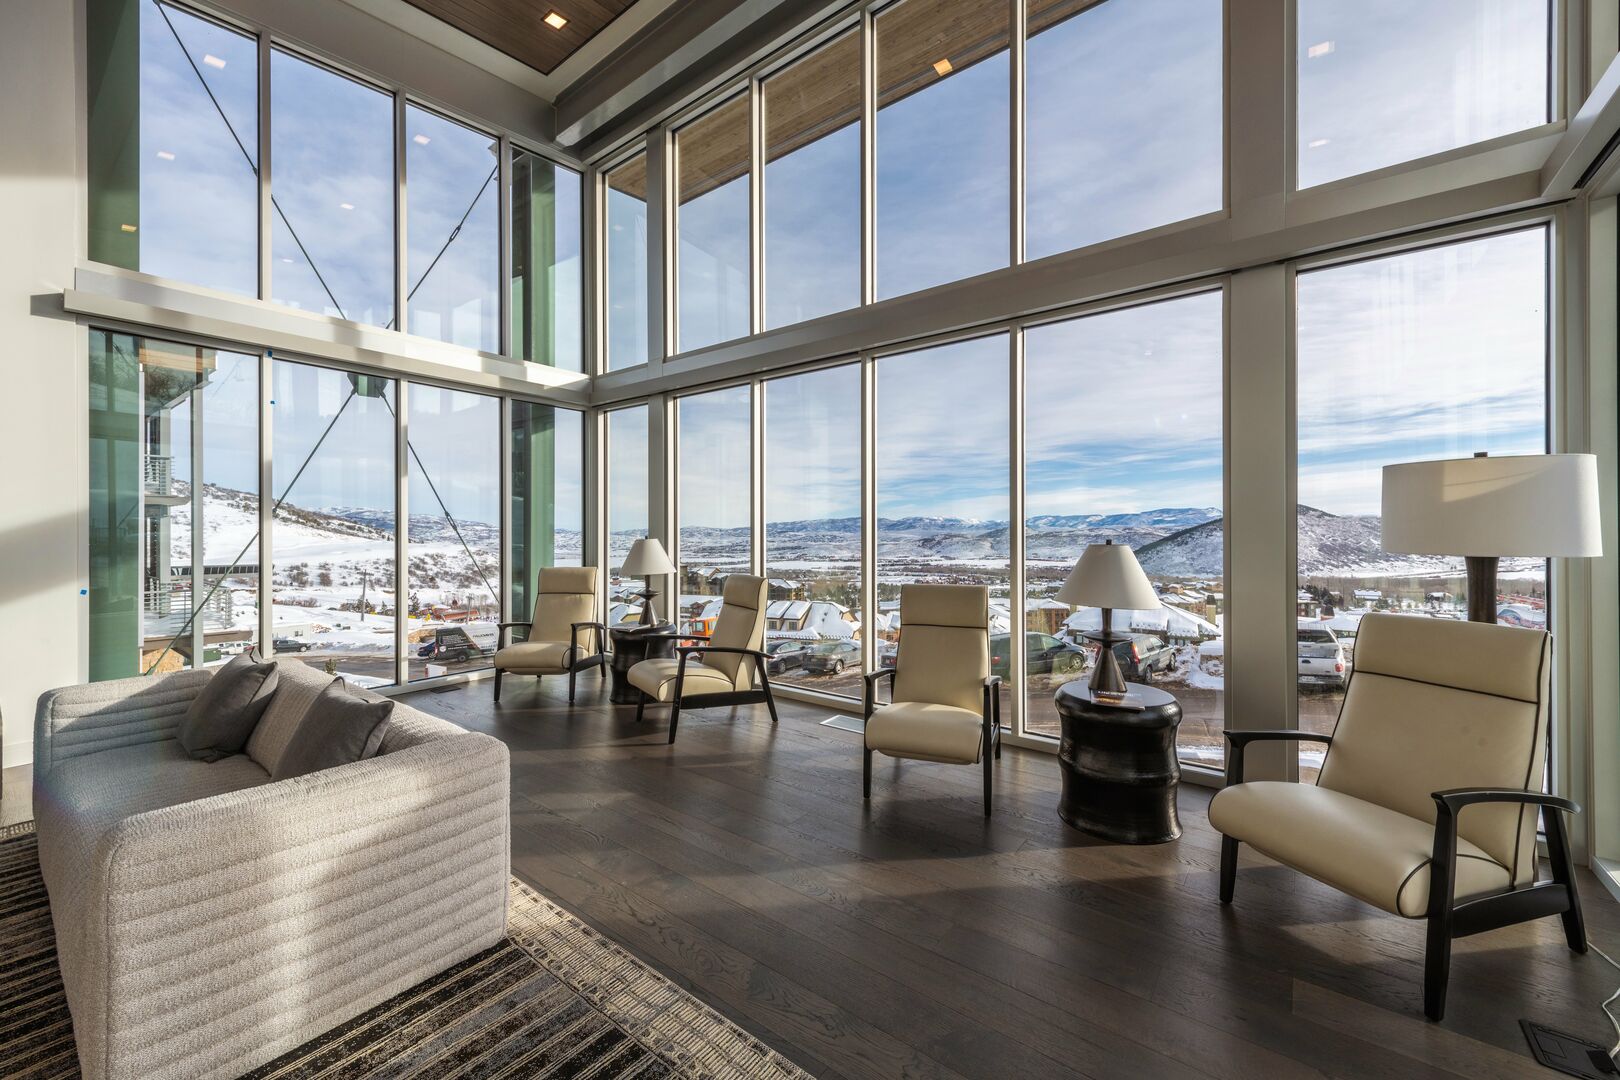 the upscale property has a beautiful lounge area with direct views of the slopes